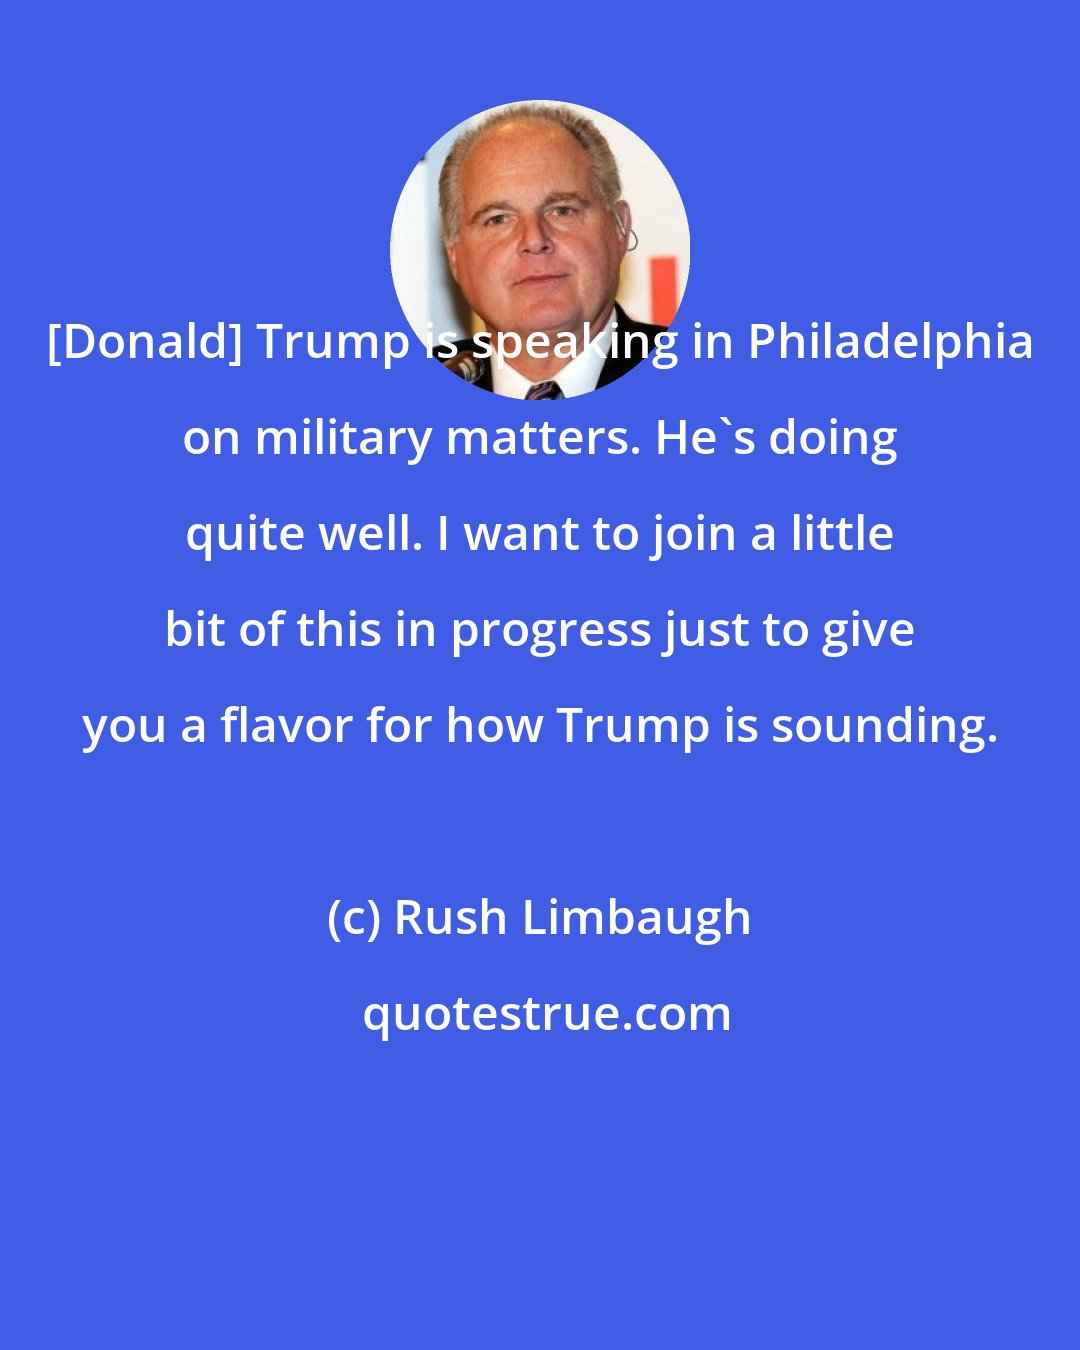 Rush Limbaugh: [Donald] Trump is speaking in Philadelphia on military matters. He's doing quite well. I want to join a little bit of this in progress just to give you a flavor for how Trump is sounding.